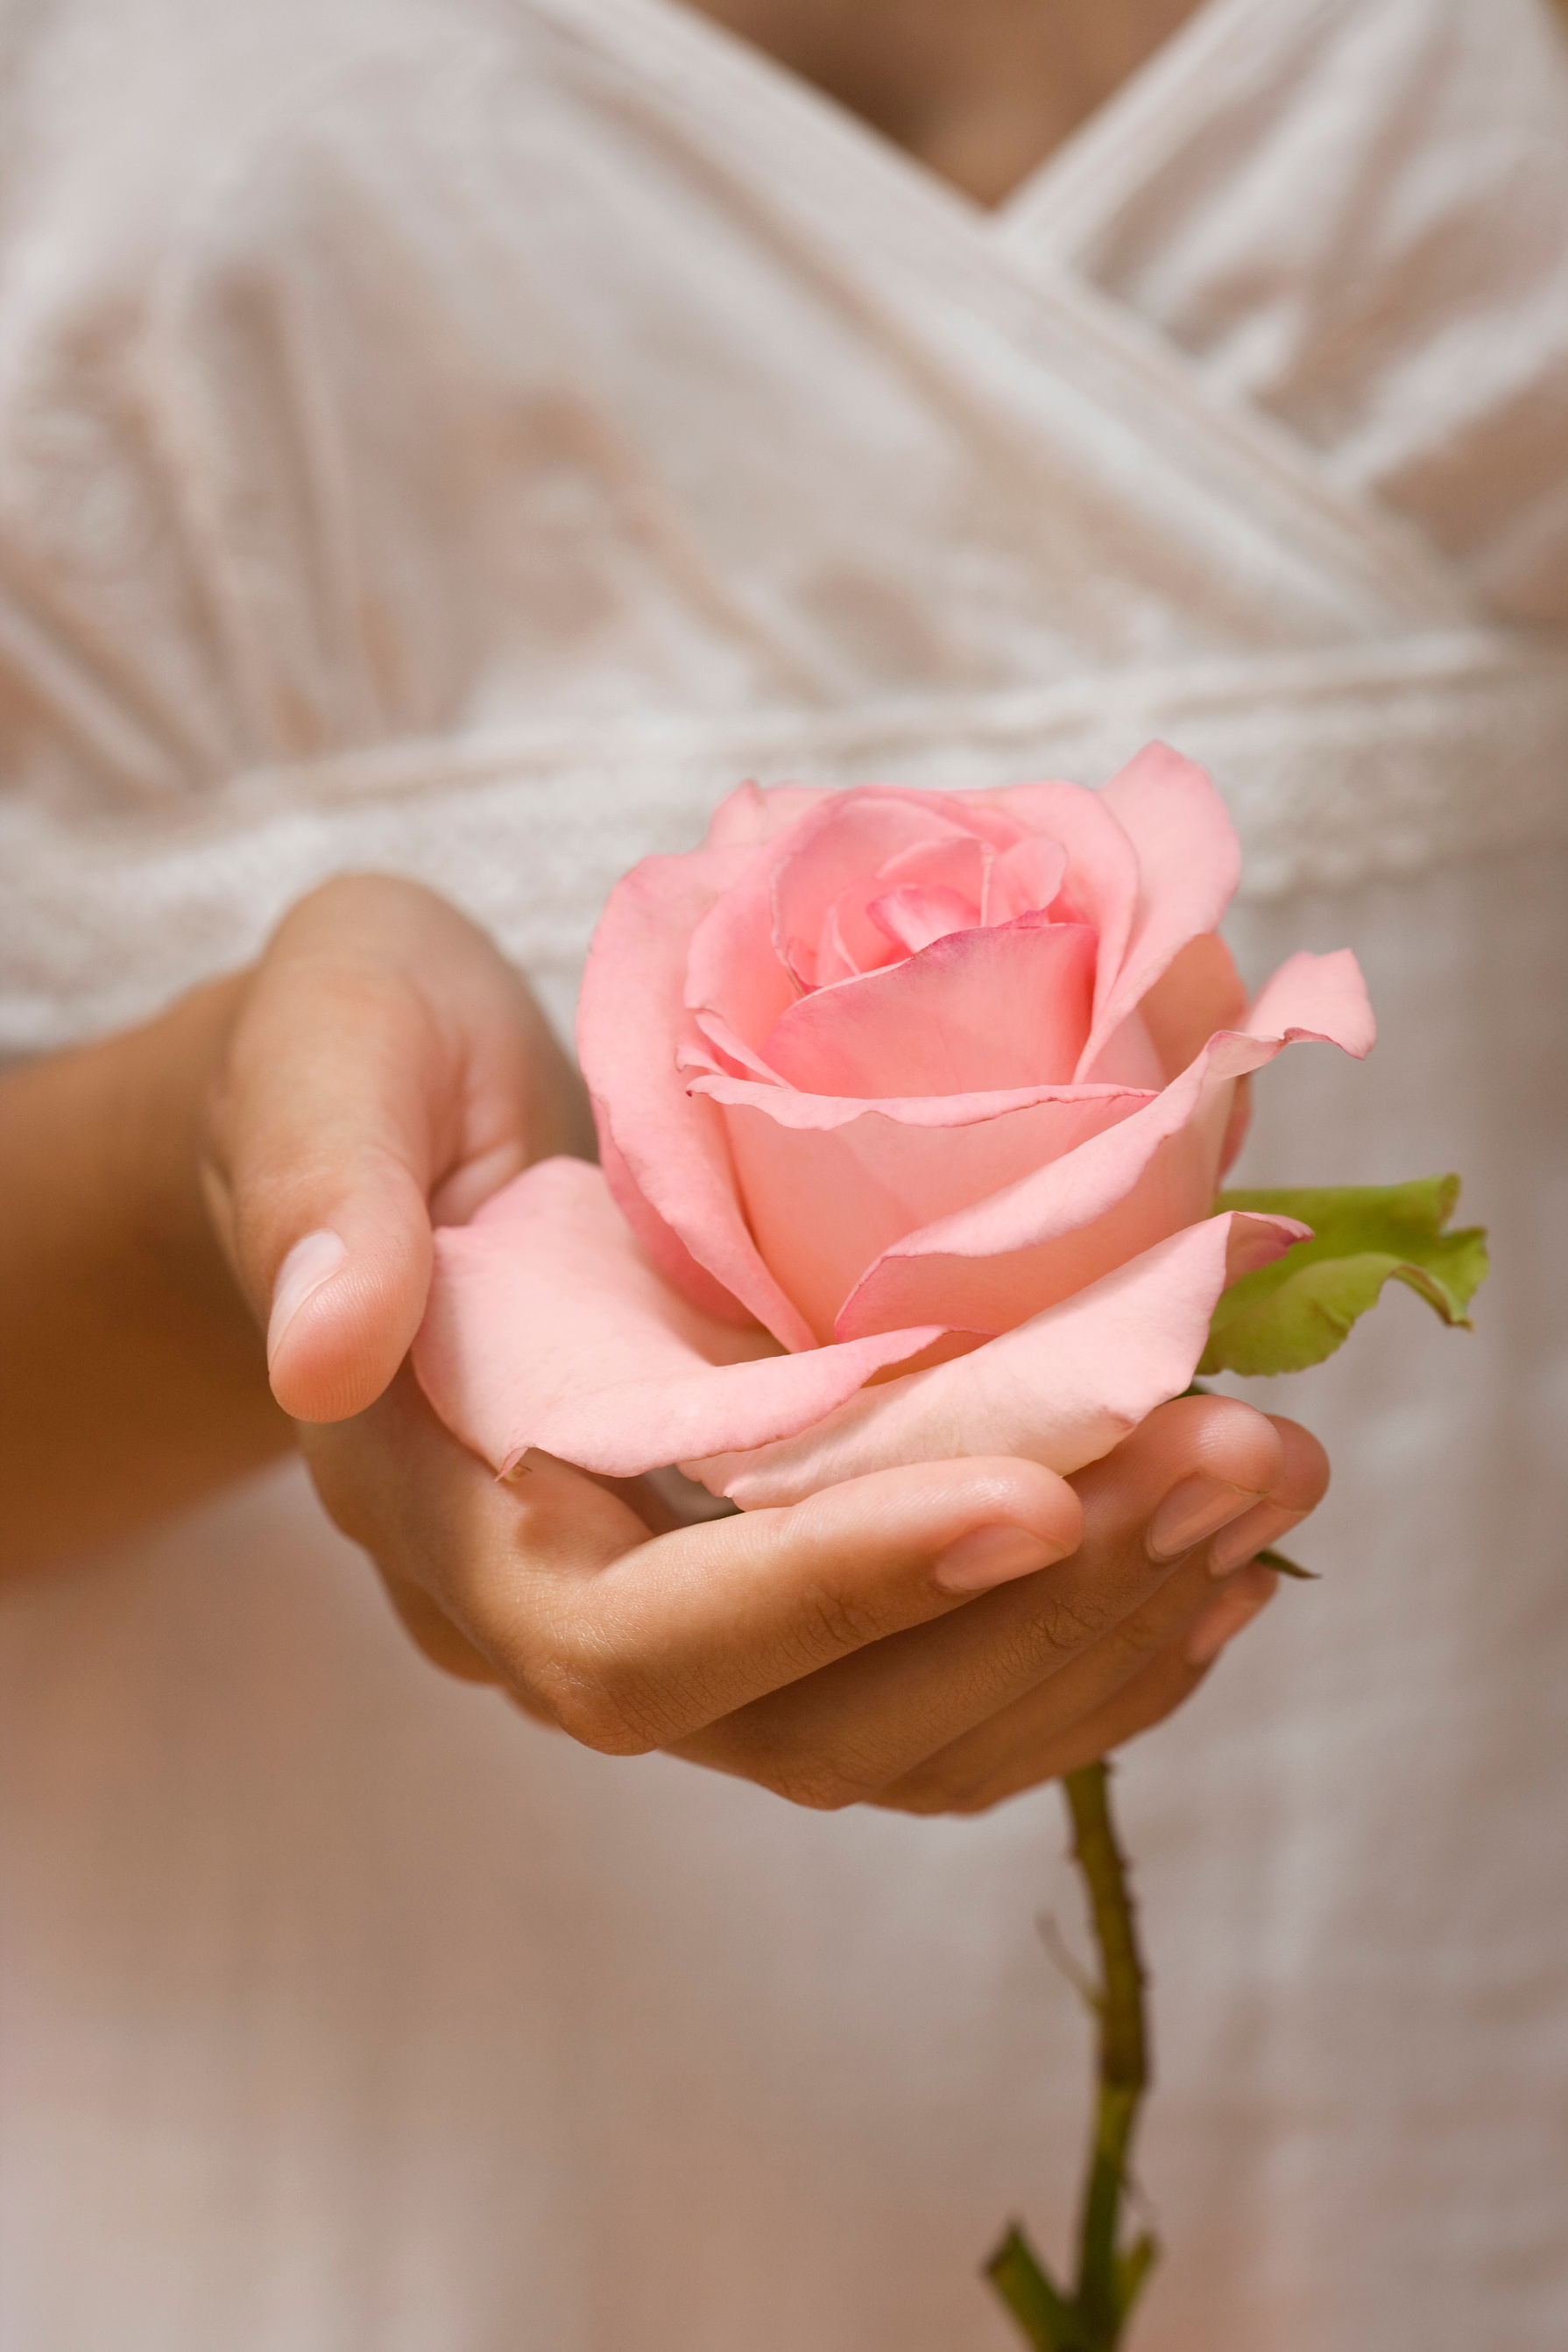 Hand with rose blossom